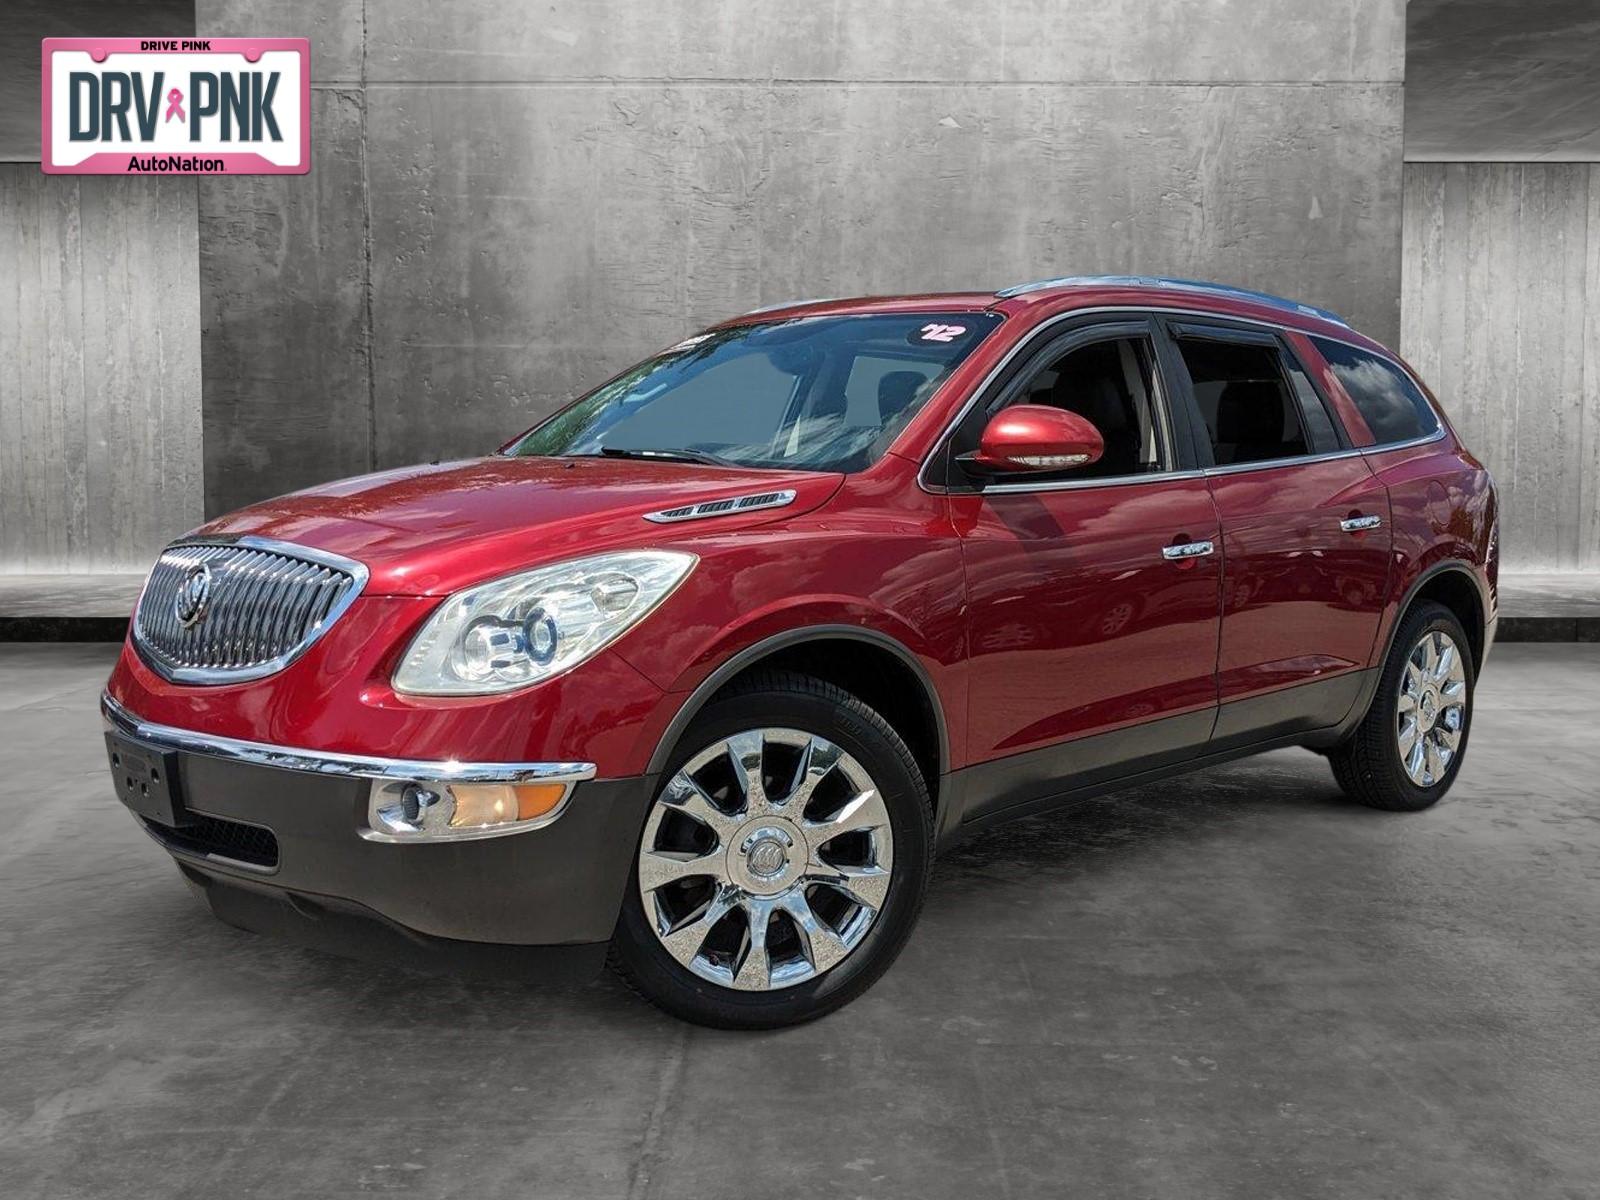 2012 Buick Enclave Vehicle Photo in Winter Park, FL 32792